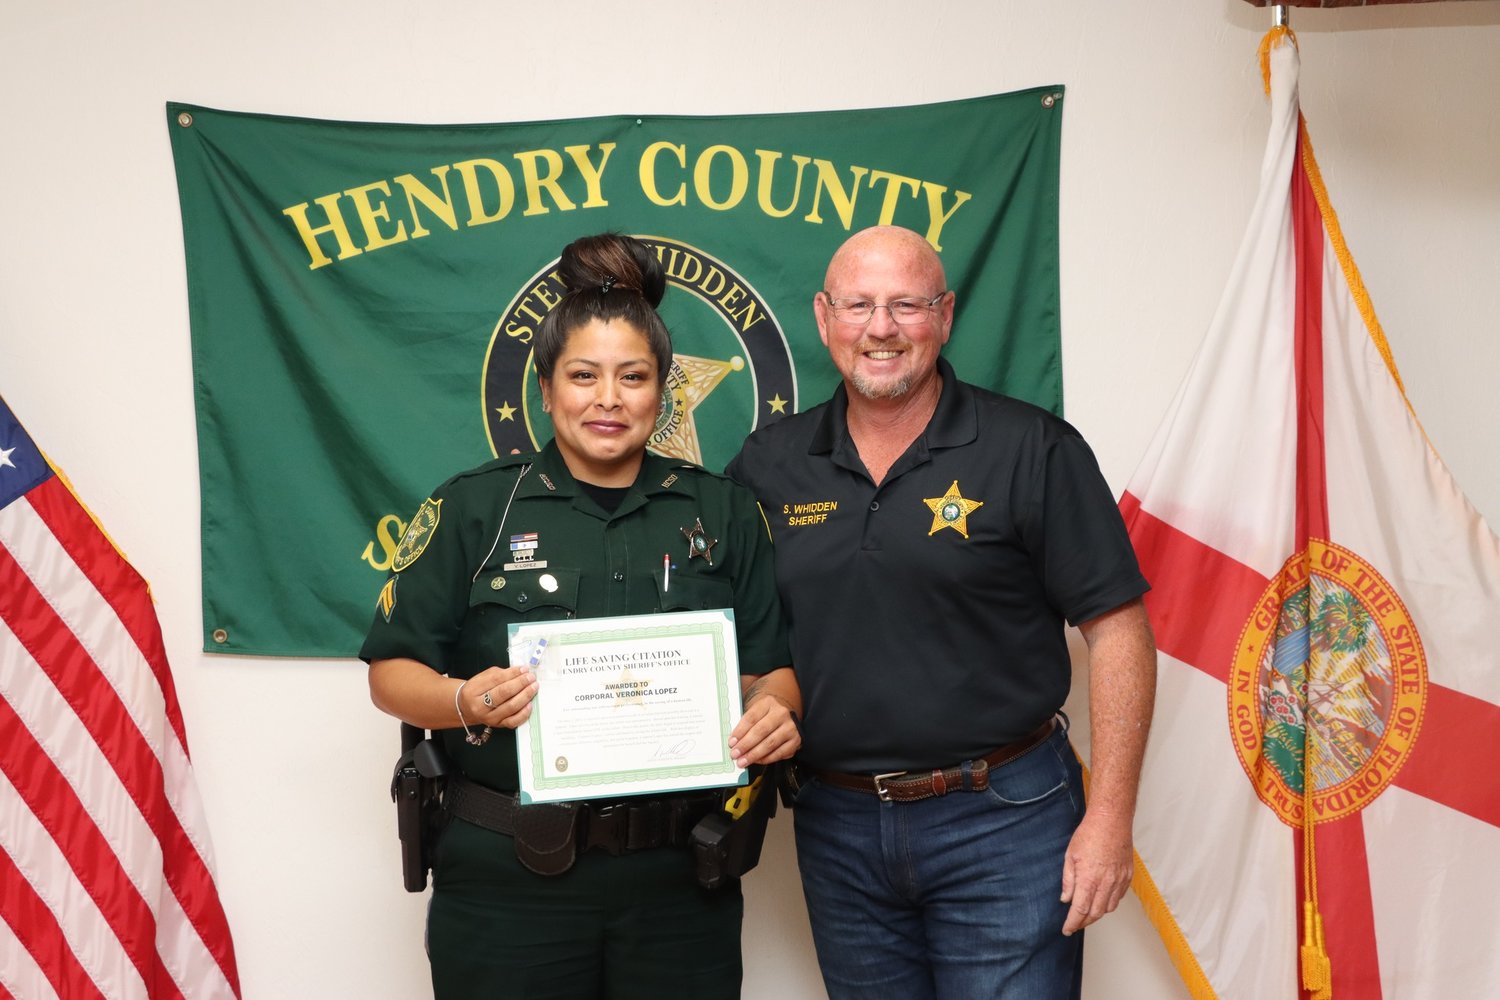 On Wednesday, August 24, 2022, Hendry County Sheriff Steve Whidden presented Corporal Veronica Lopez the Life Saving Award for Outstanding Law Enforcement 
Performance.